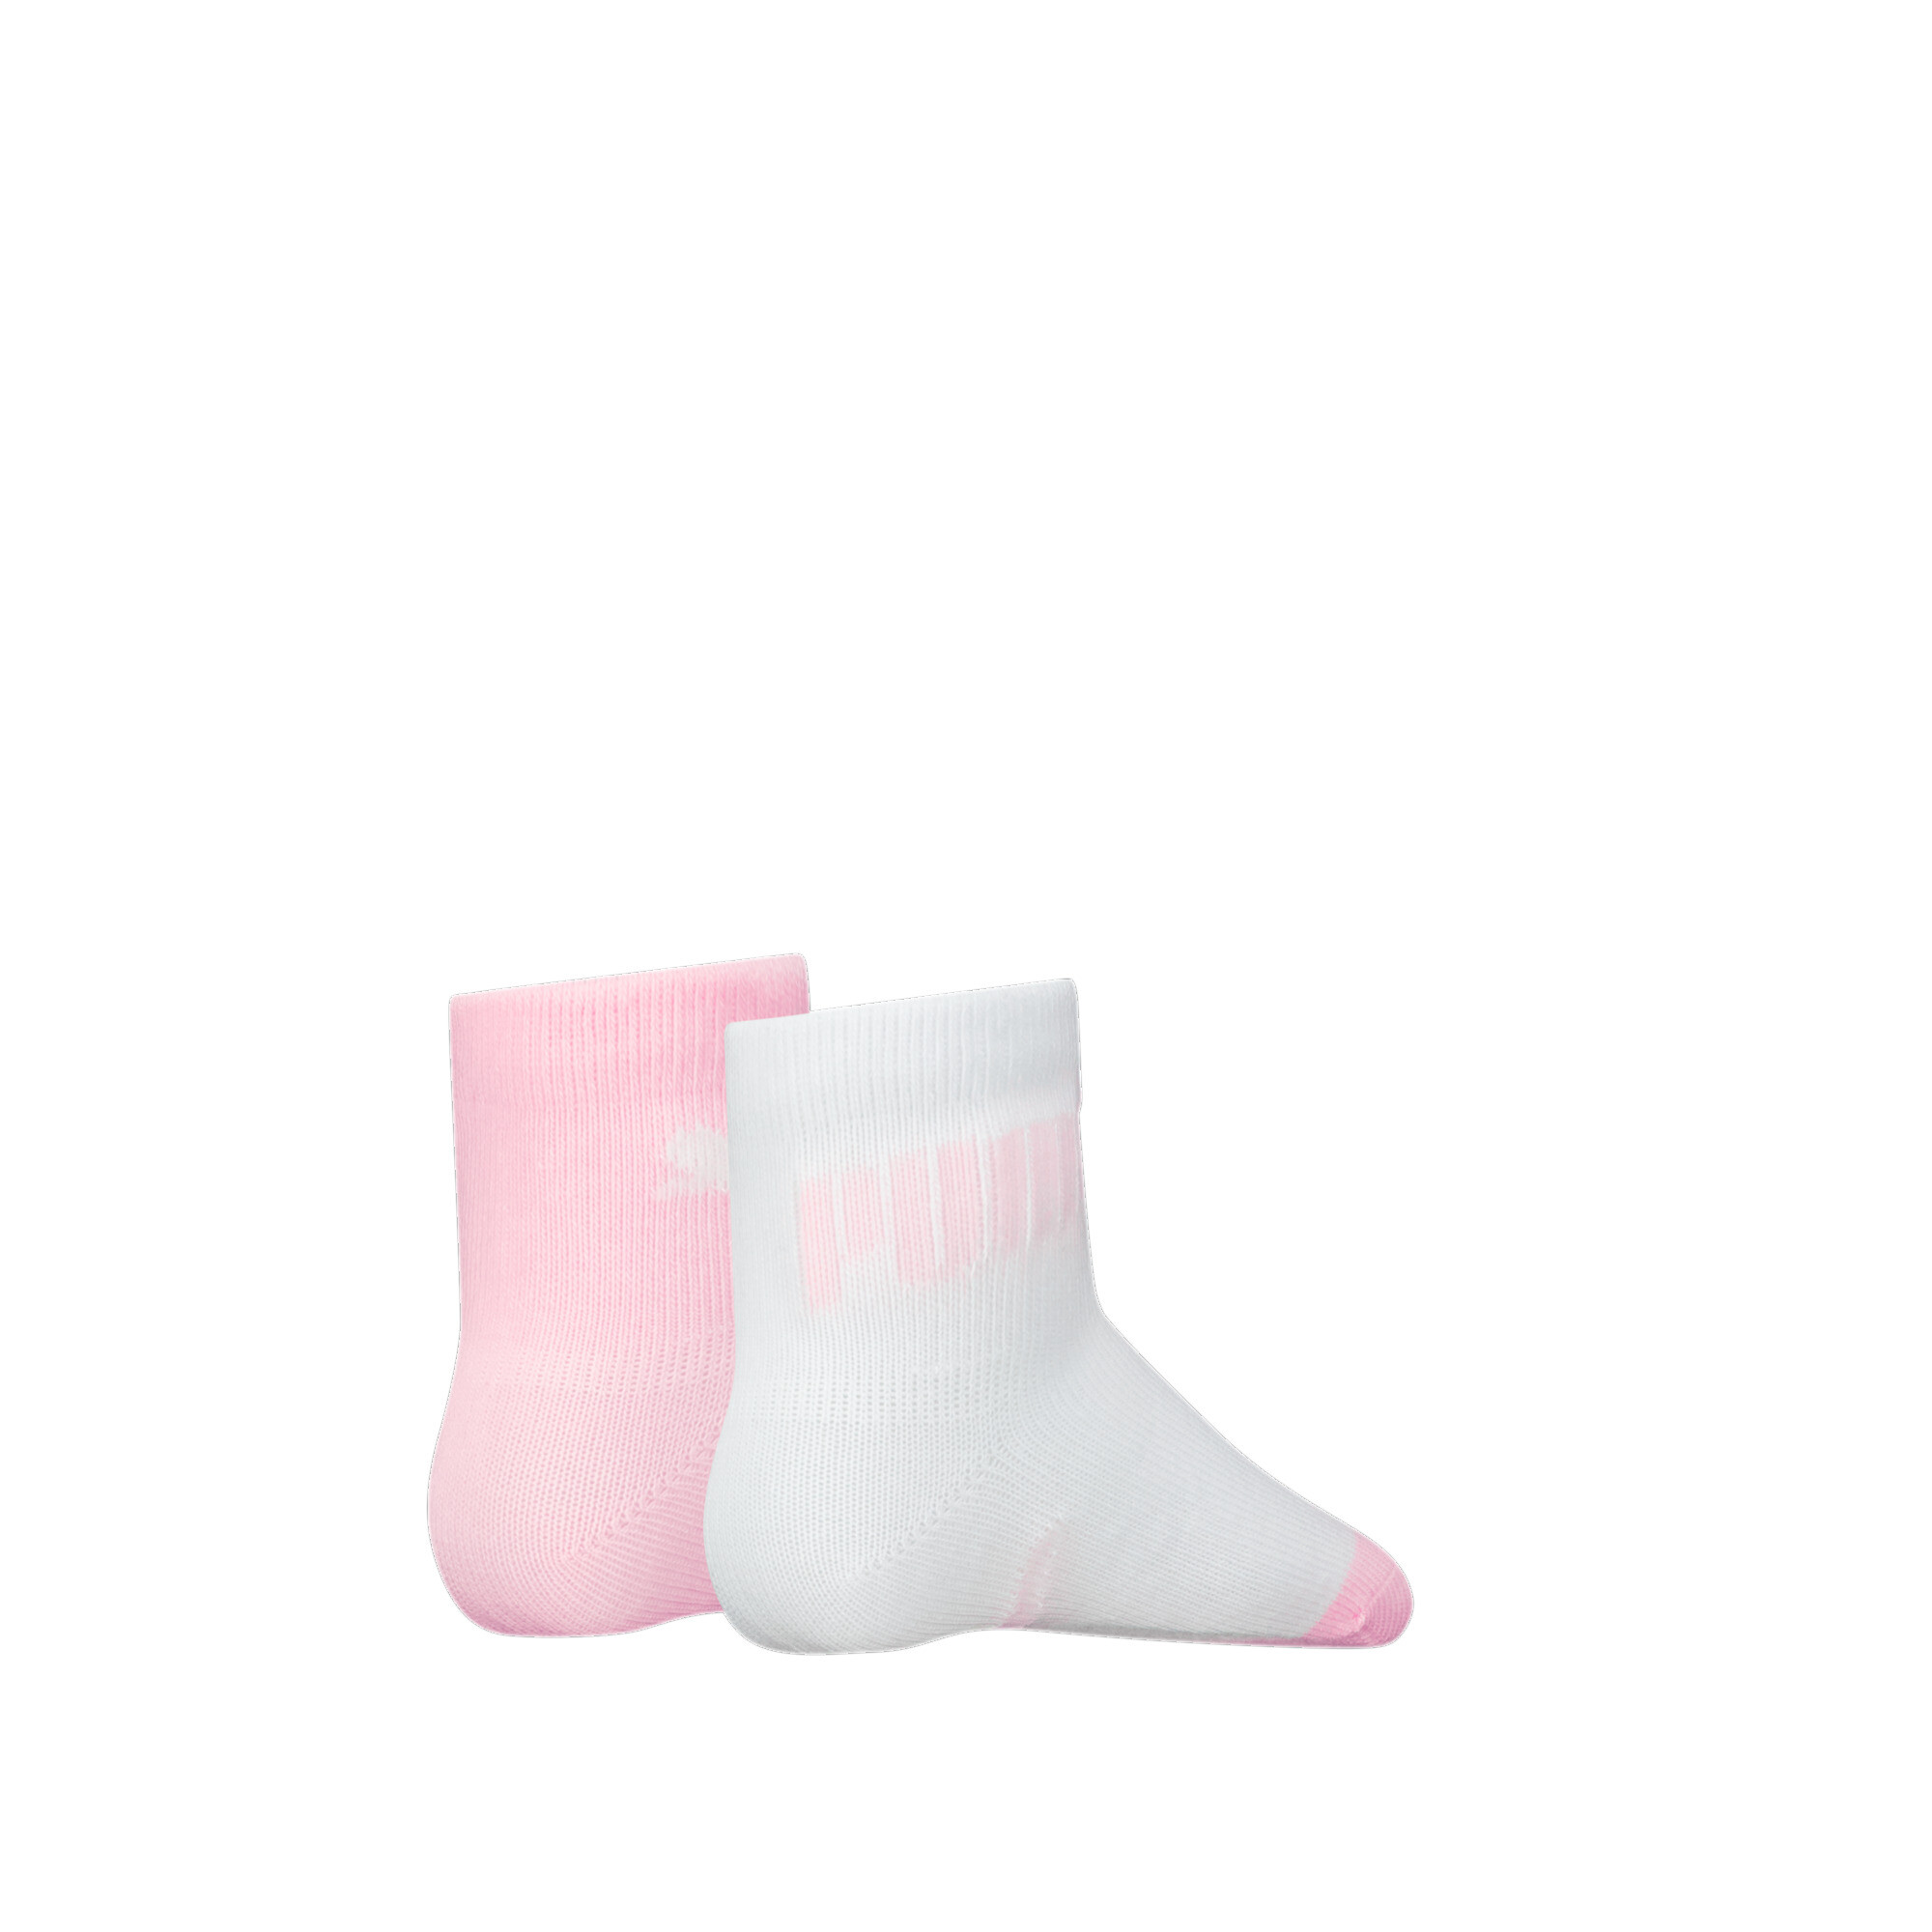 Puma Baby Classic Socks 2 Pack, Pink, Size 19-22, Age